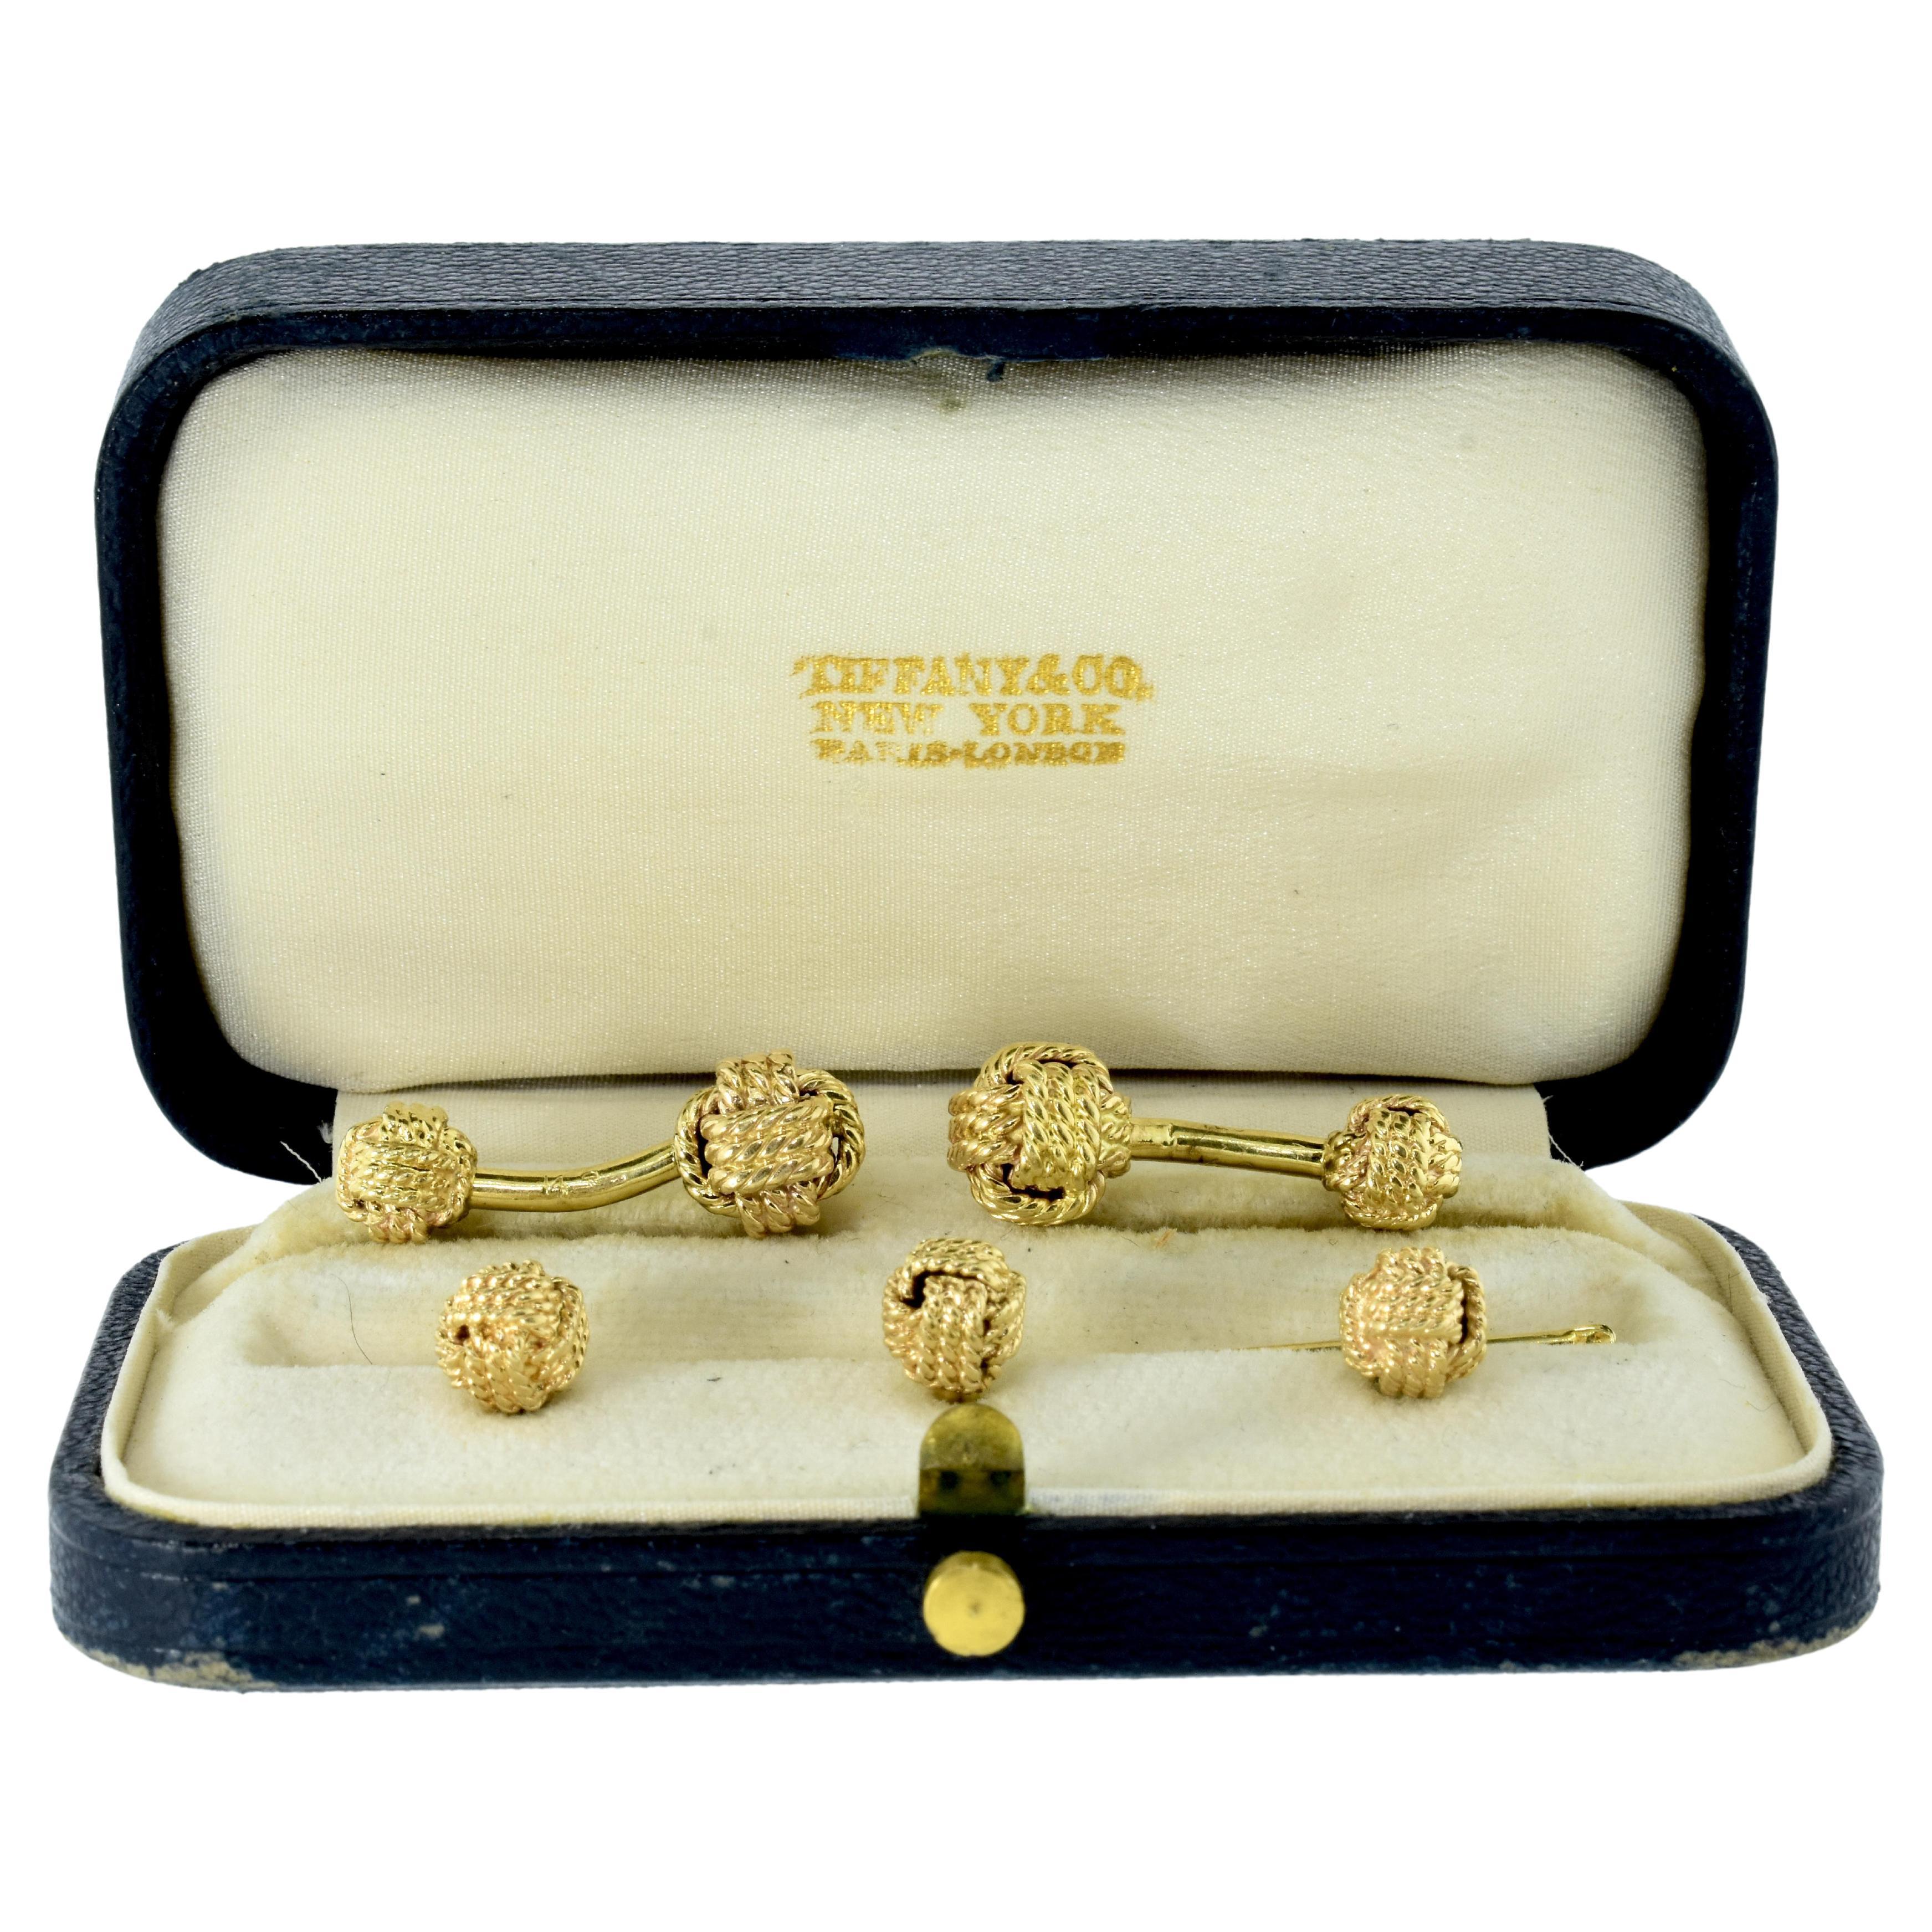 Tiffany & Co. Yellow Gold Cuff & Stud Set in a Love Knot Motif, Vintage, c. 1970